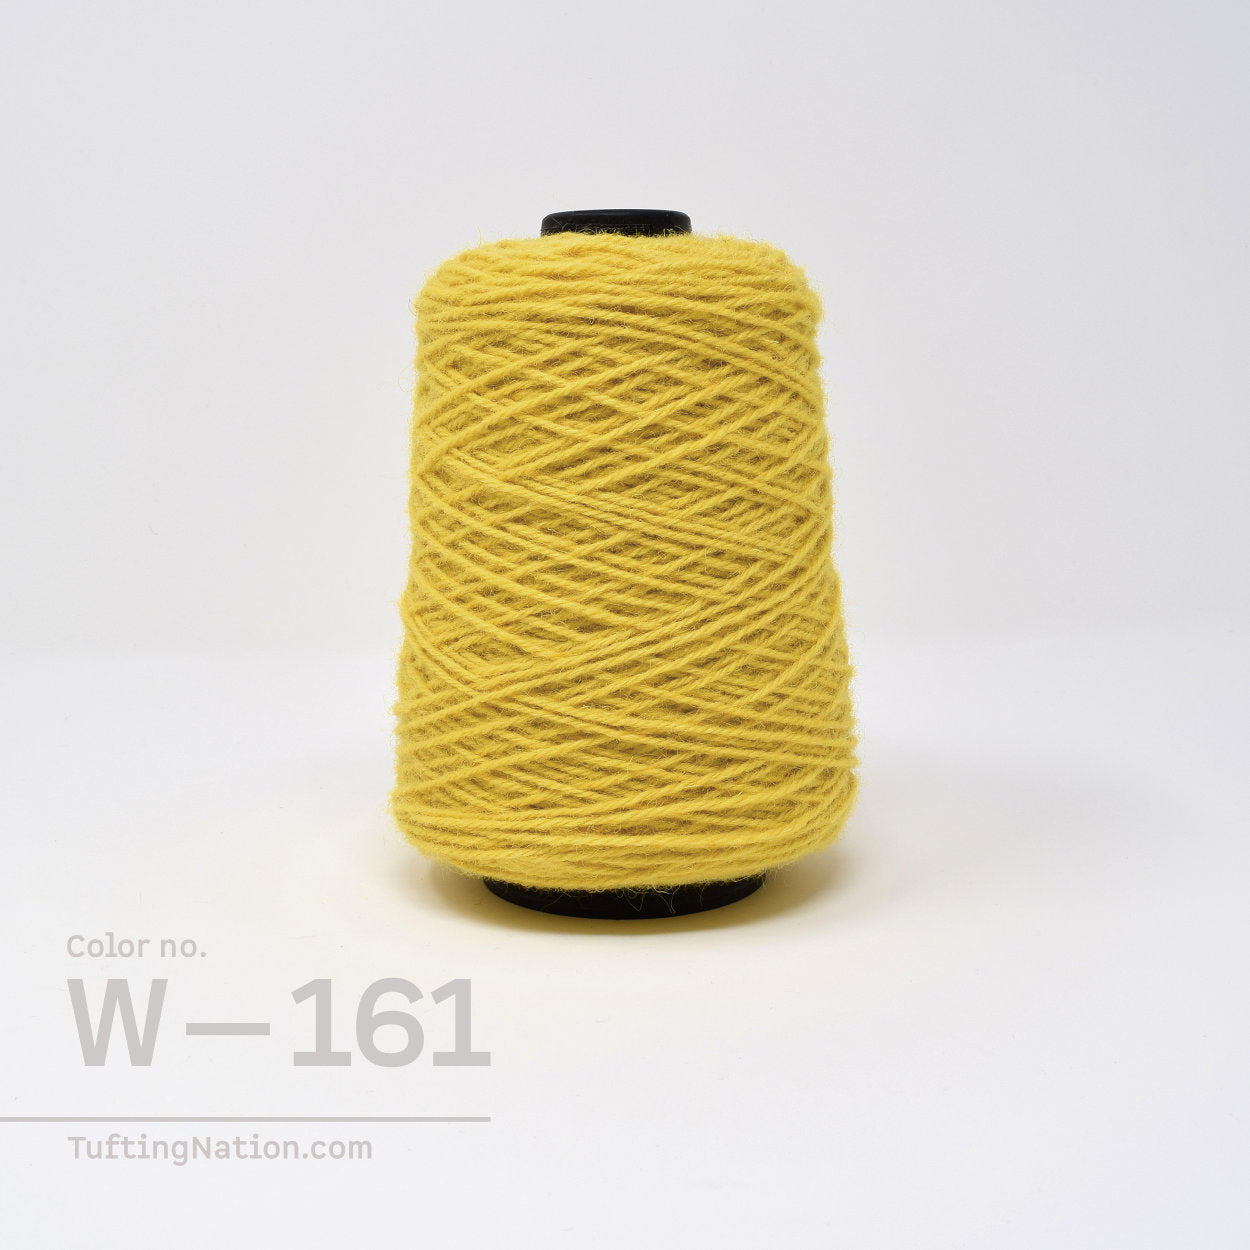 Best Wool Rug Yarn for Tufting Machine and Tapestry Weaving | TuftingNation